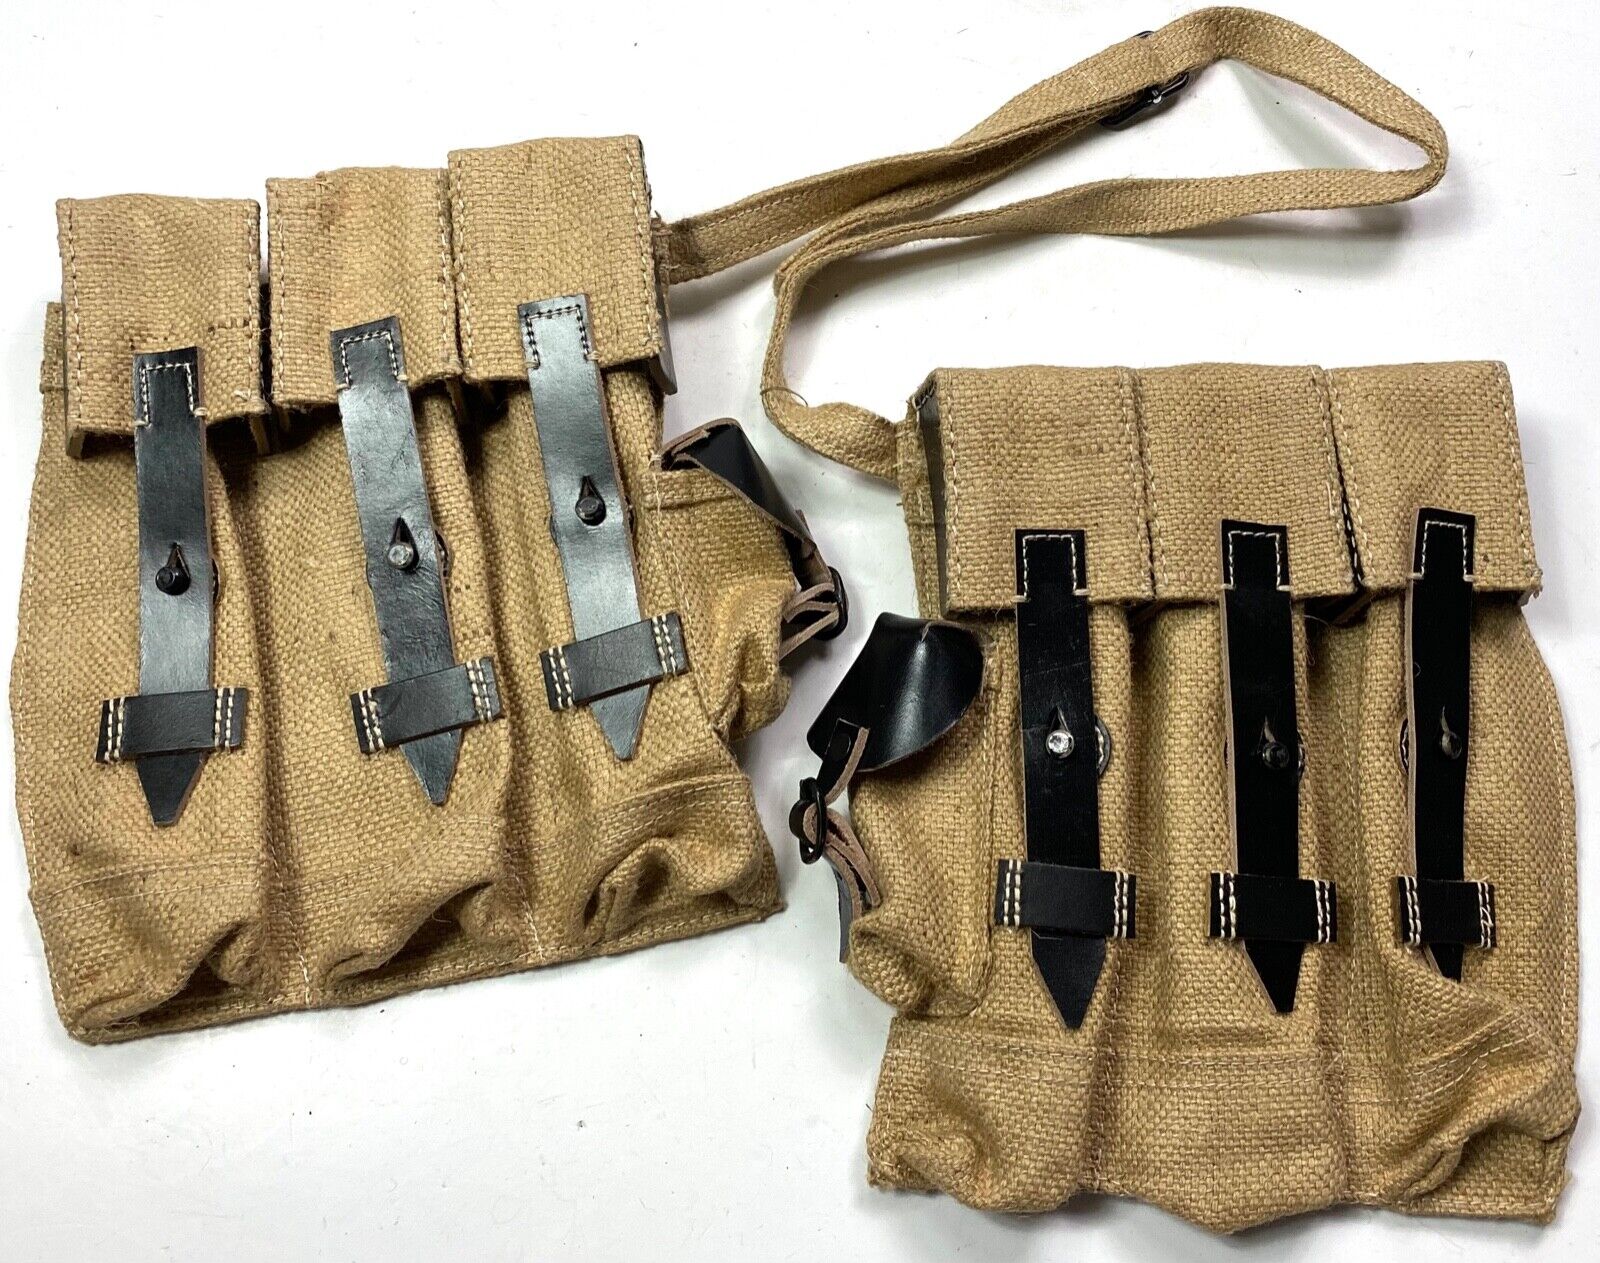  WWII GERMAN LATE WAR MP STG AMMO POUCHES-JUTE COTTON